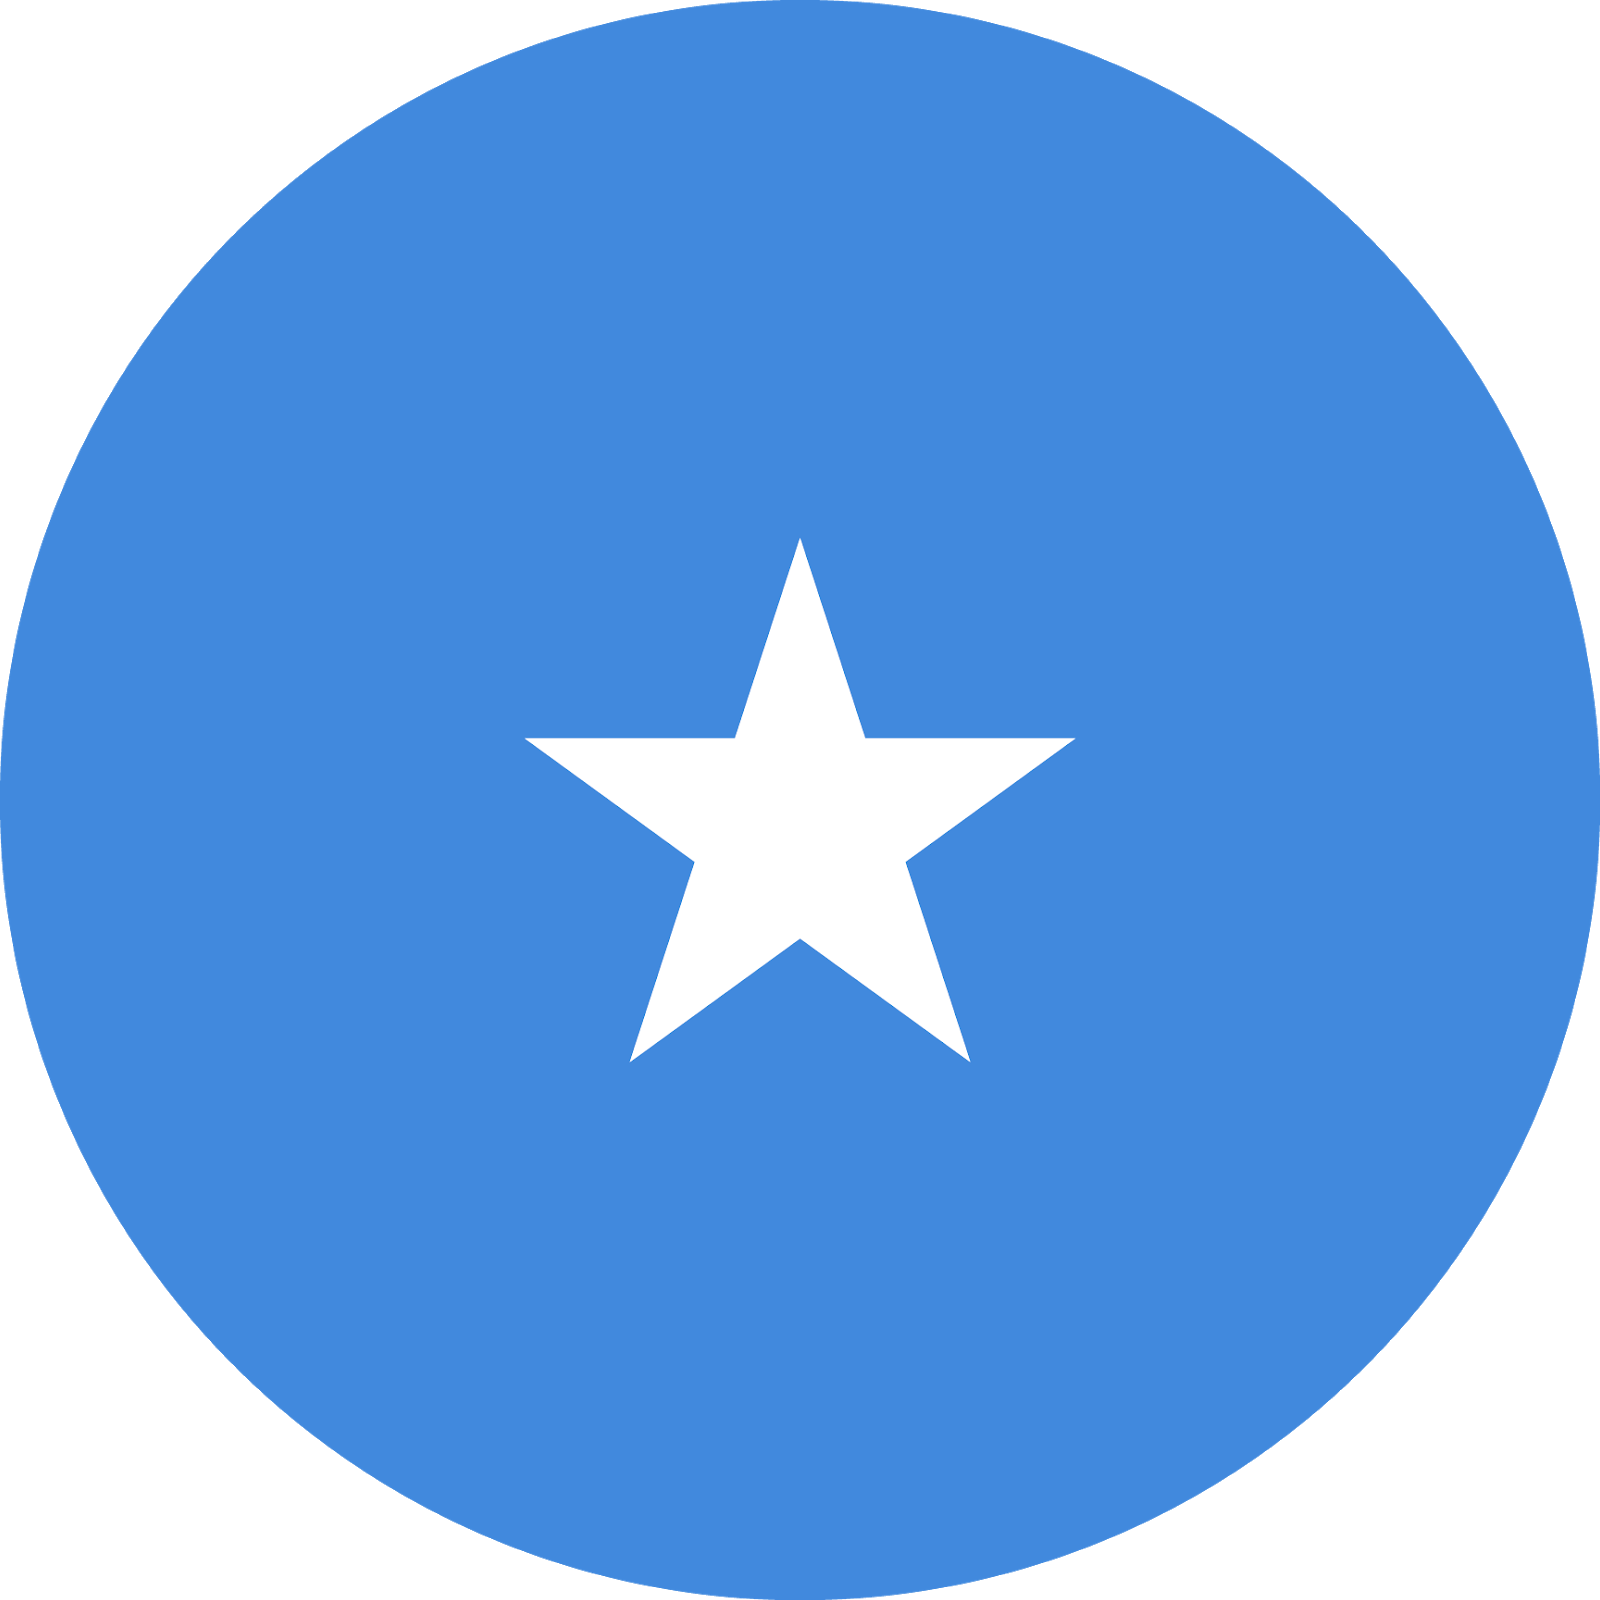 A Blue Circle With A White Star In It